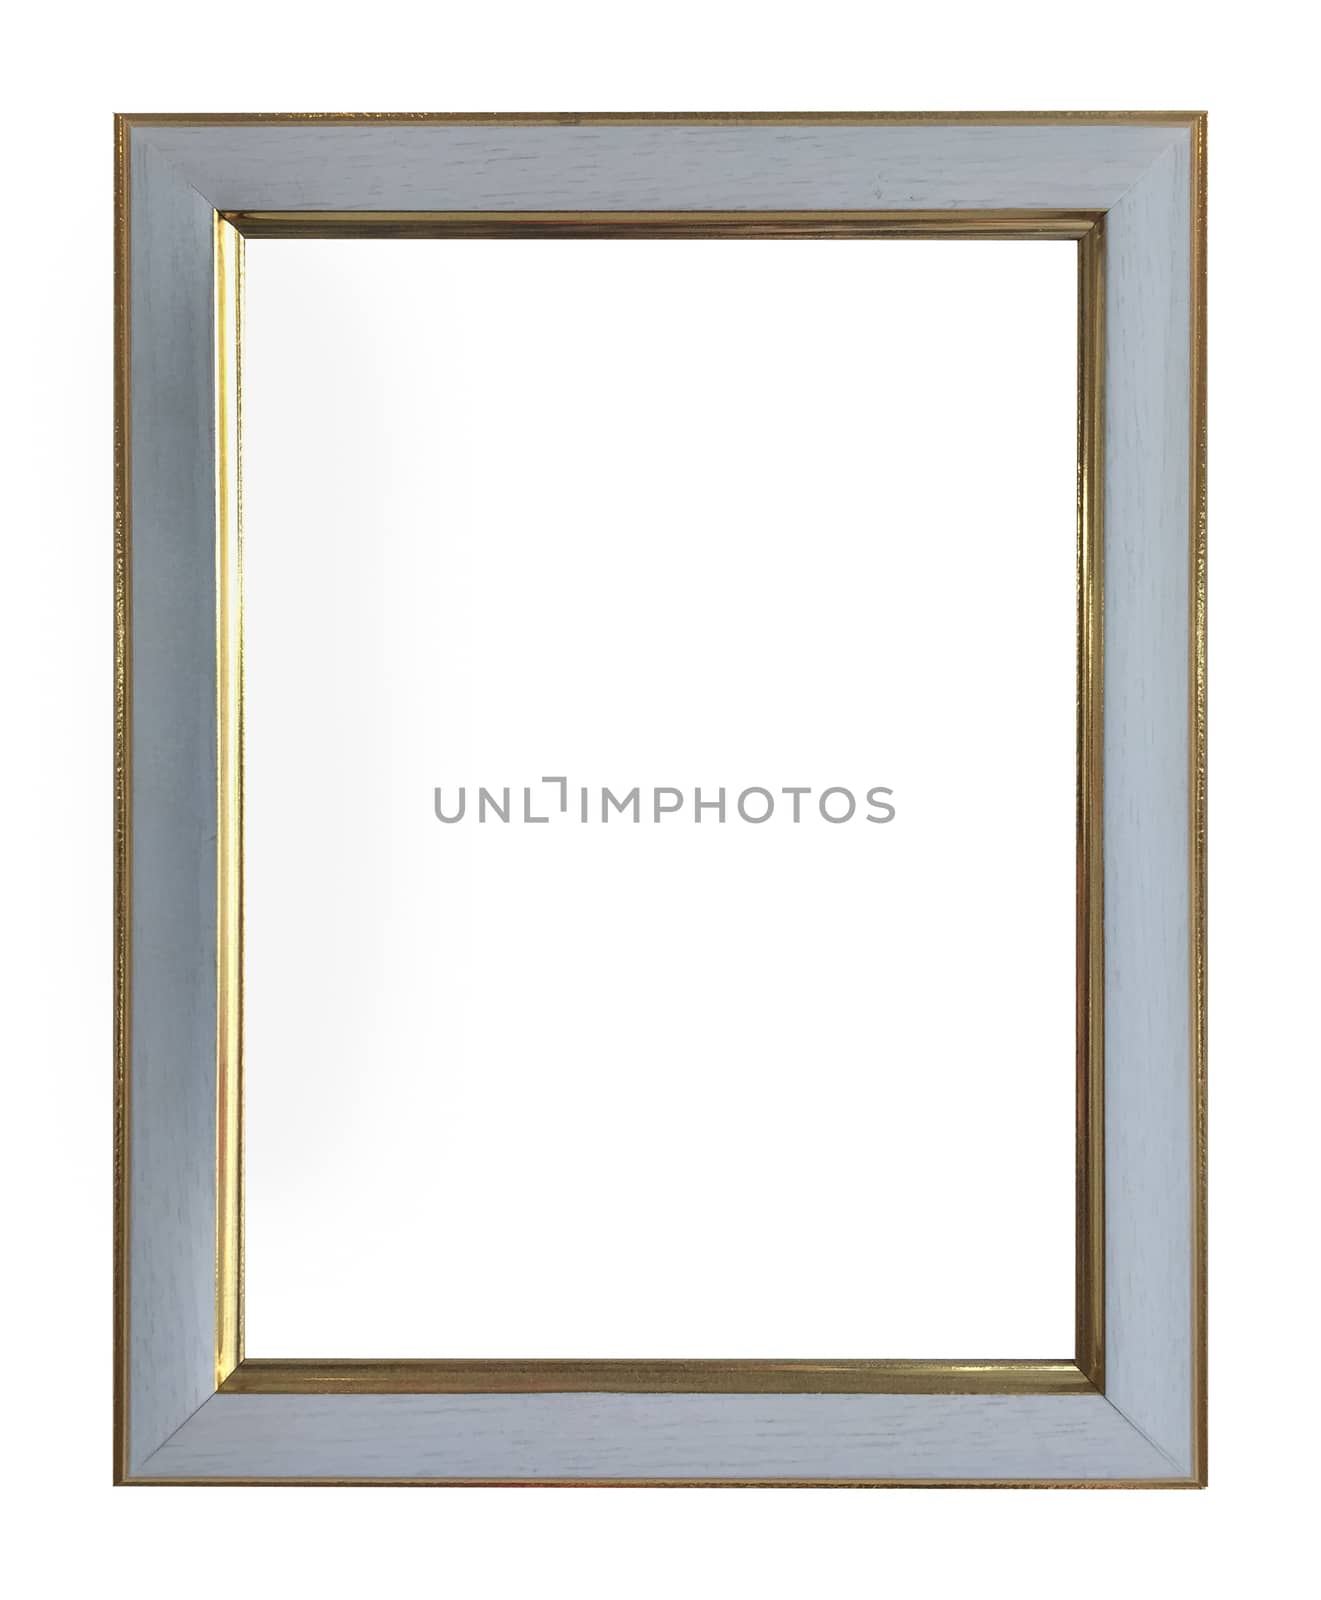 Frame white and gold copper vintage isolated background. by jayzynism